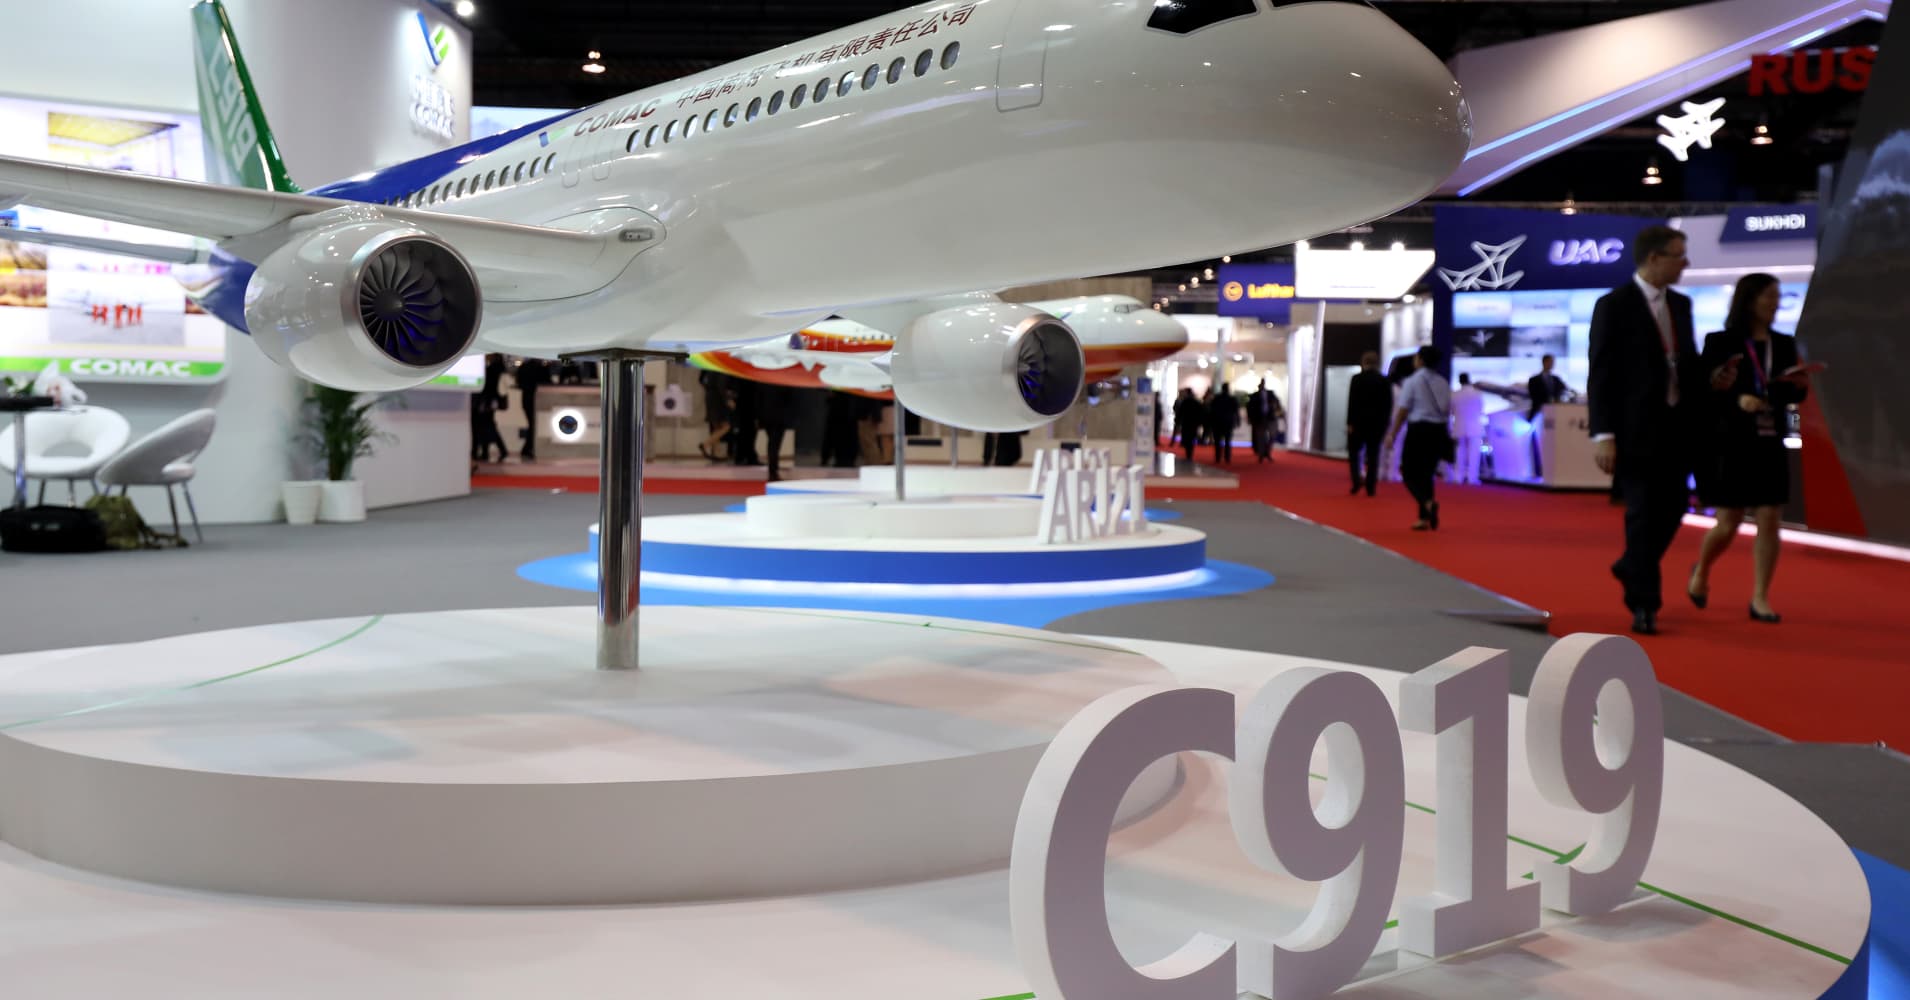 china will showcase its domestic jetliner at the singapore airshow. here's what else to expect